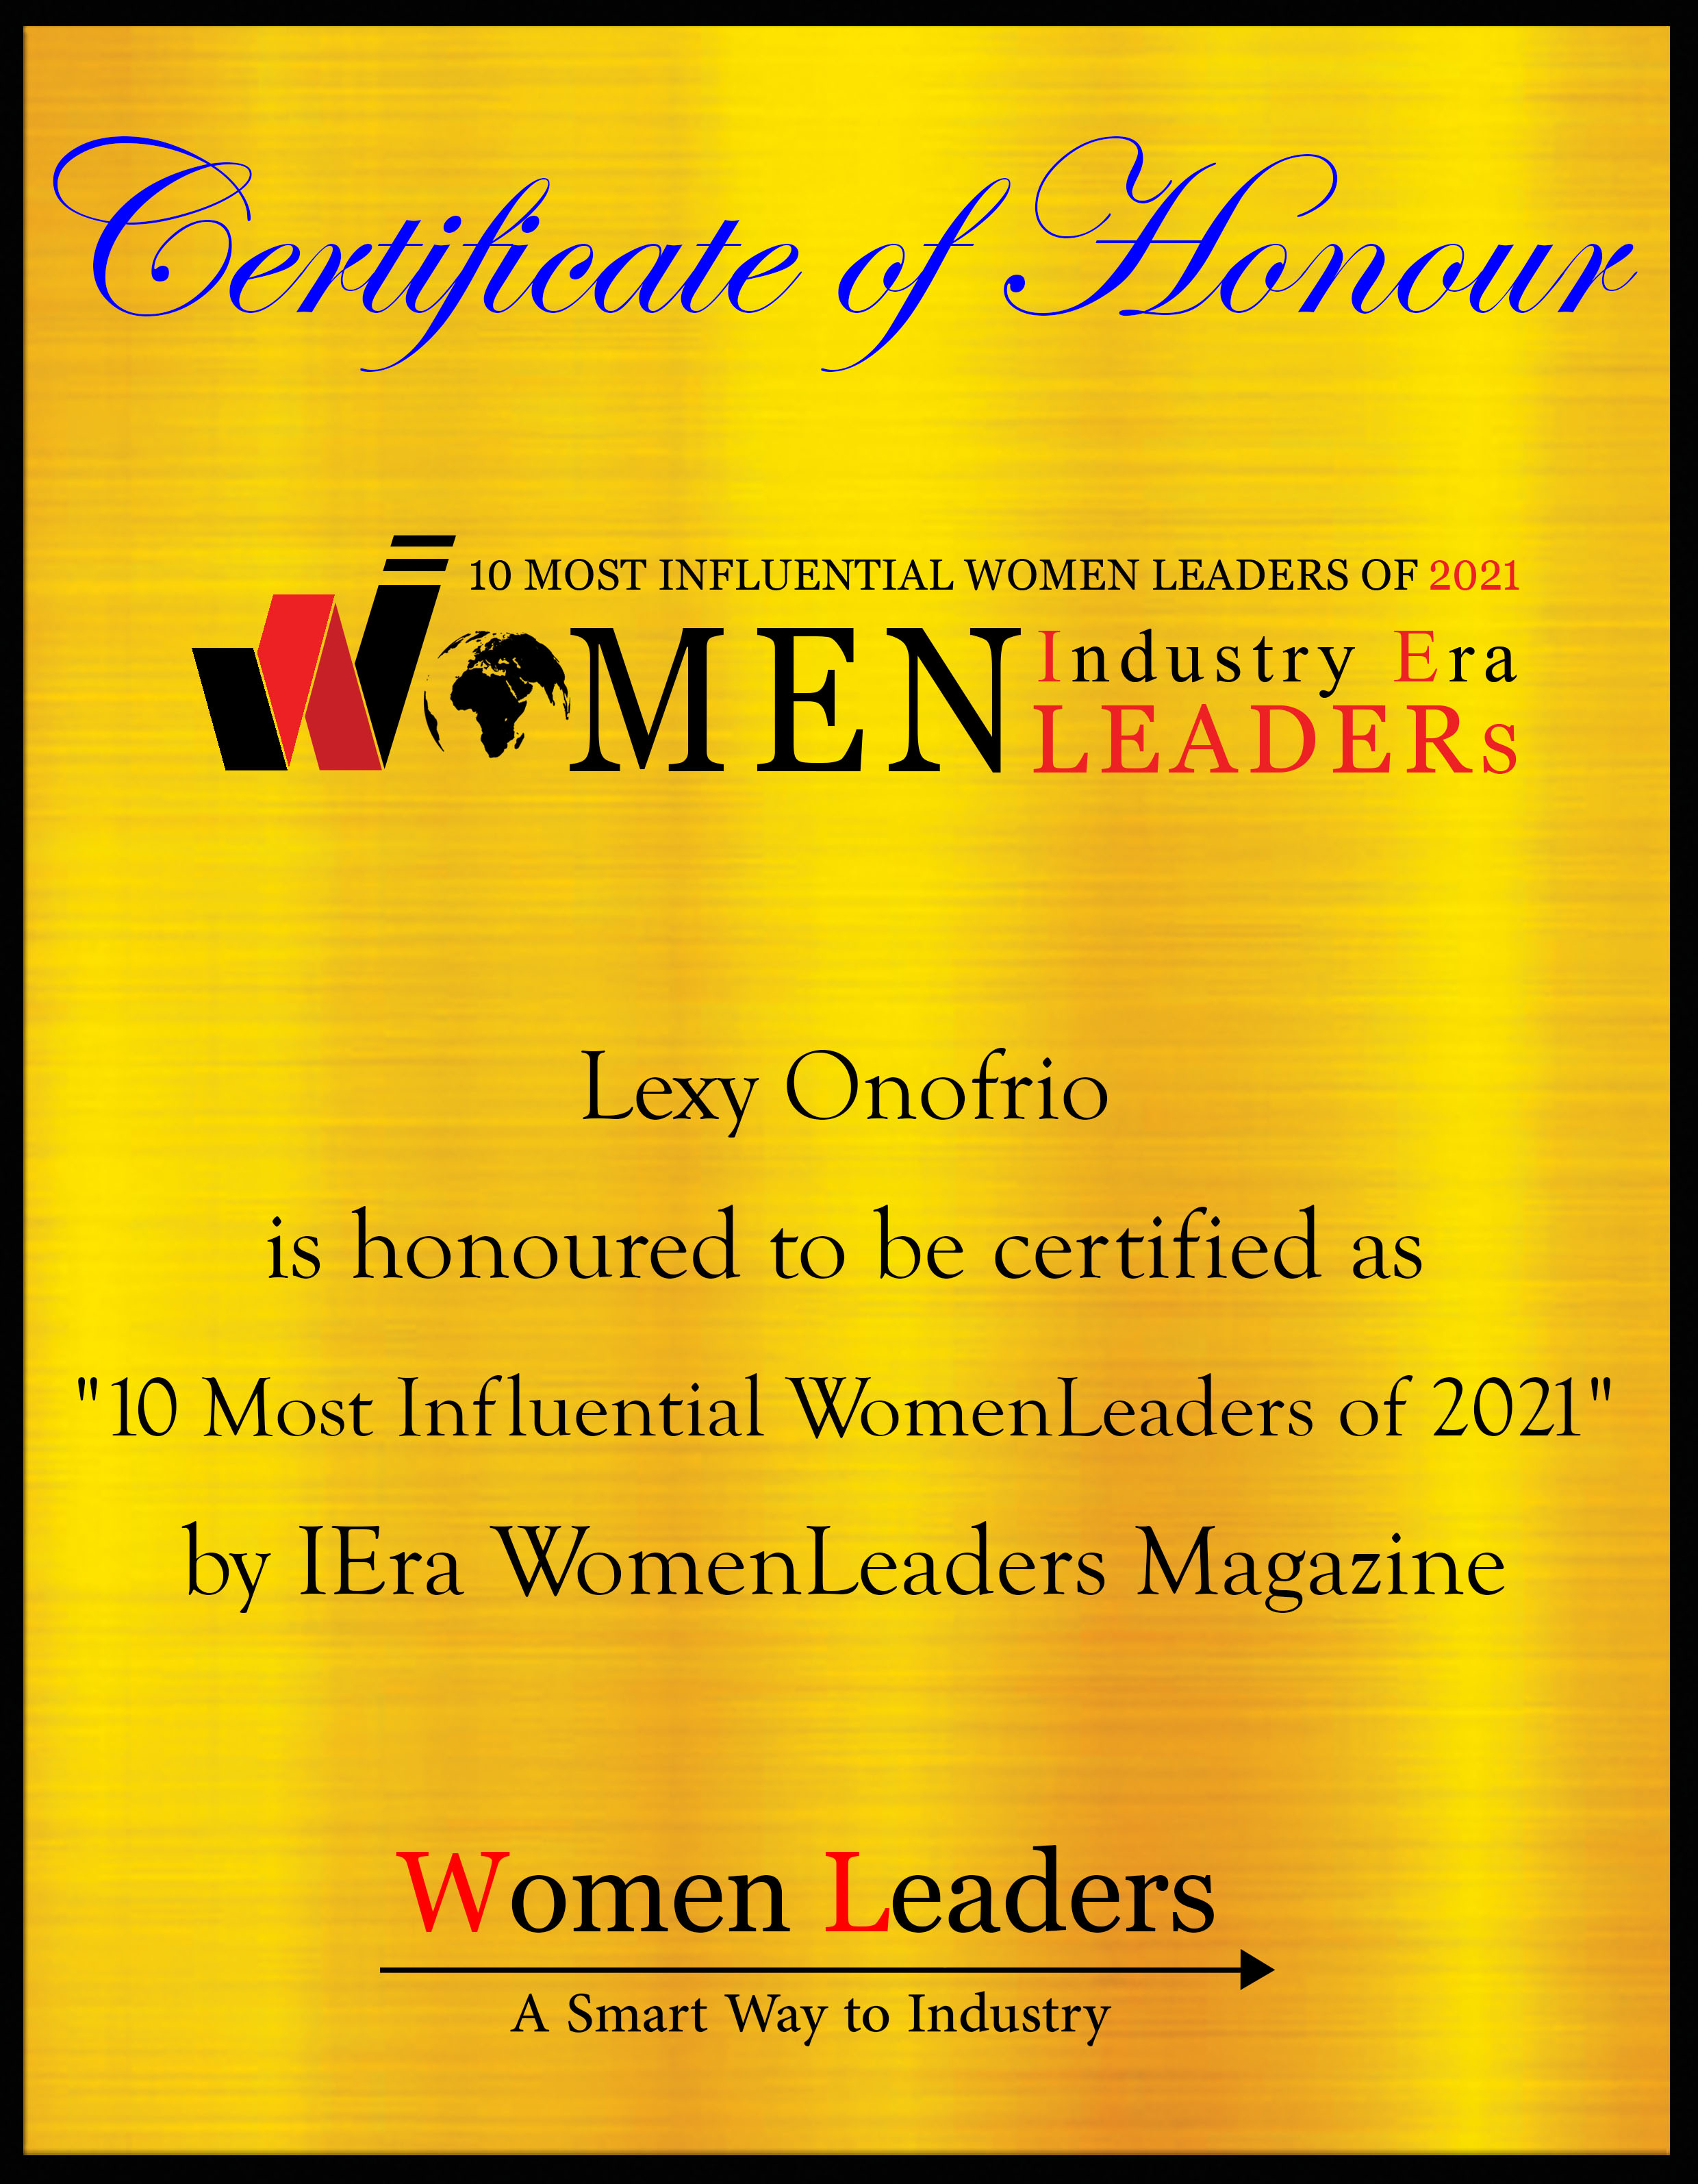 Lexy Onofrio, Senior Vice President Marketing at Ascena Retail Group, Most Influential WomenLeaders of 2021